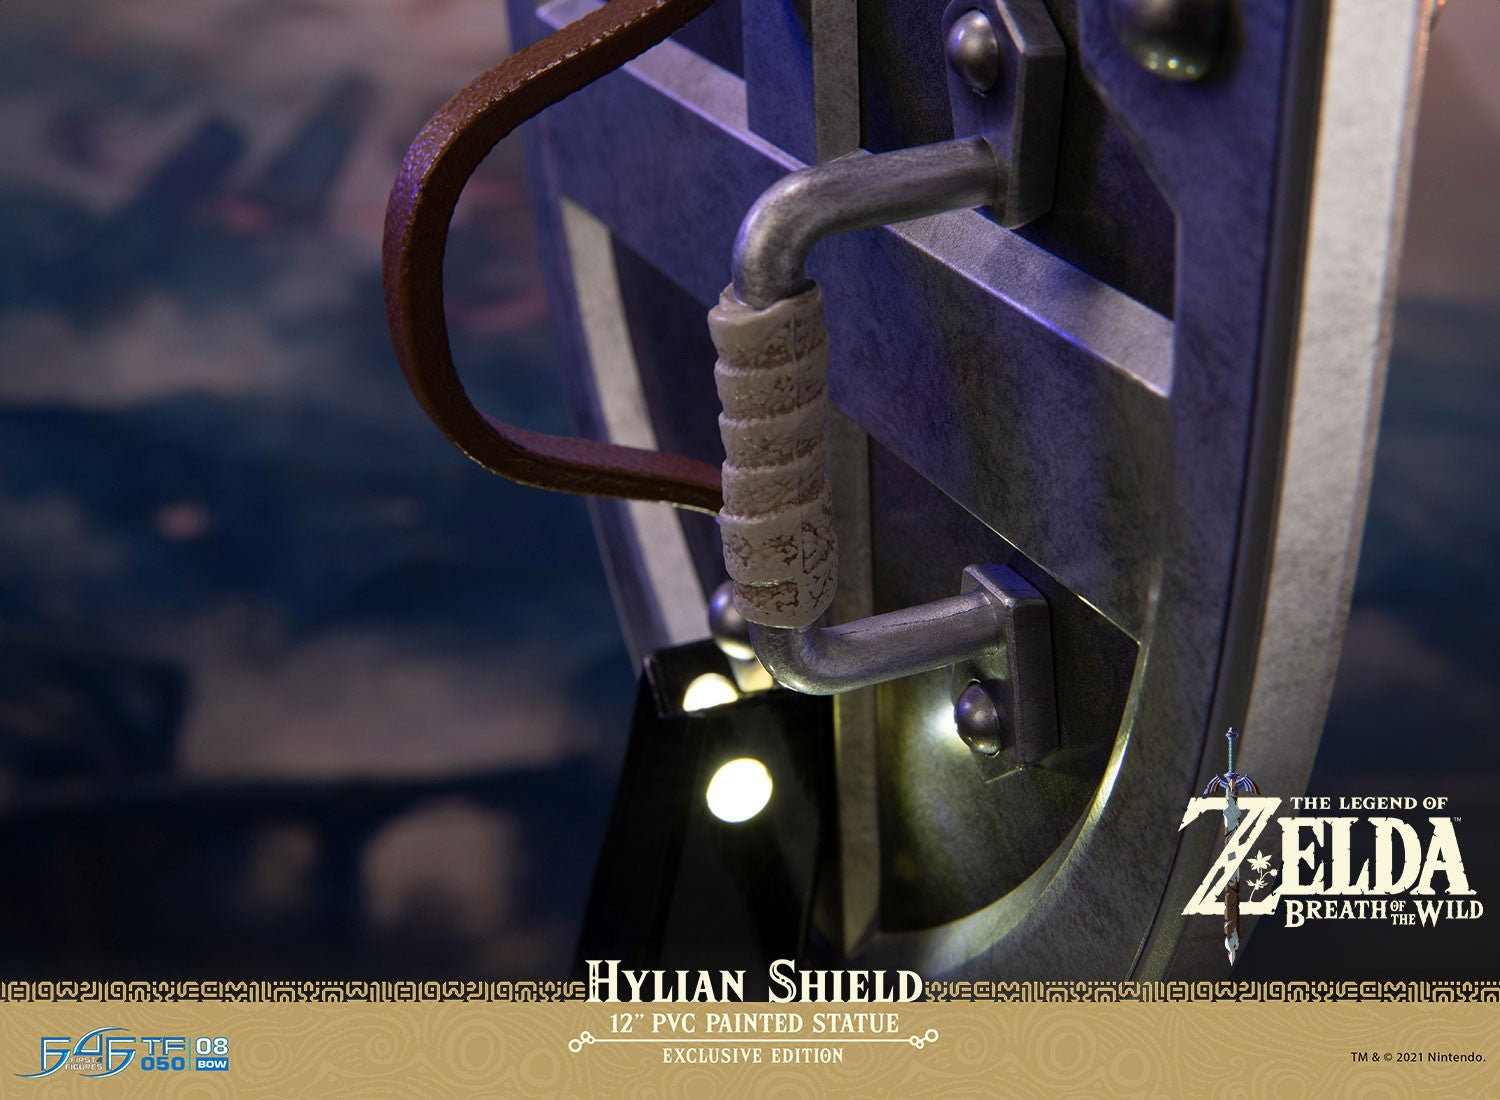 The Legend Of Zelda Breath Of The Wild – Hylian Shield Exclusive Edition